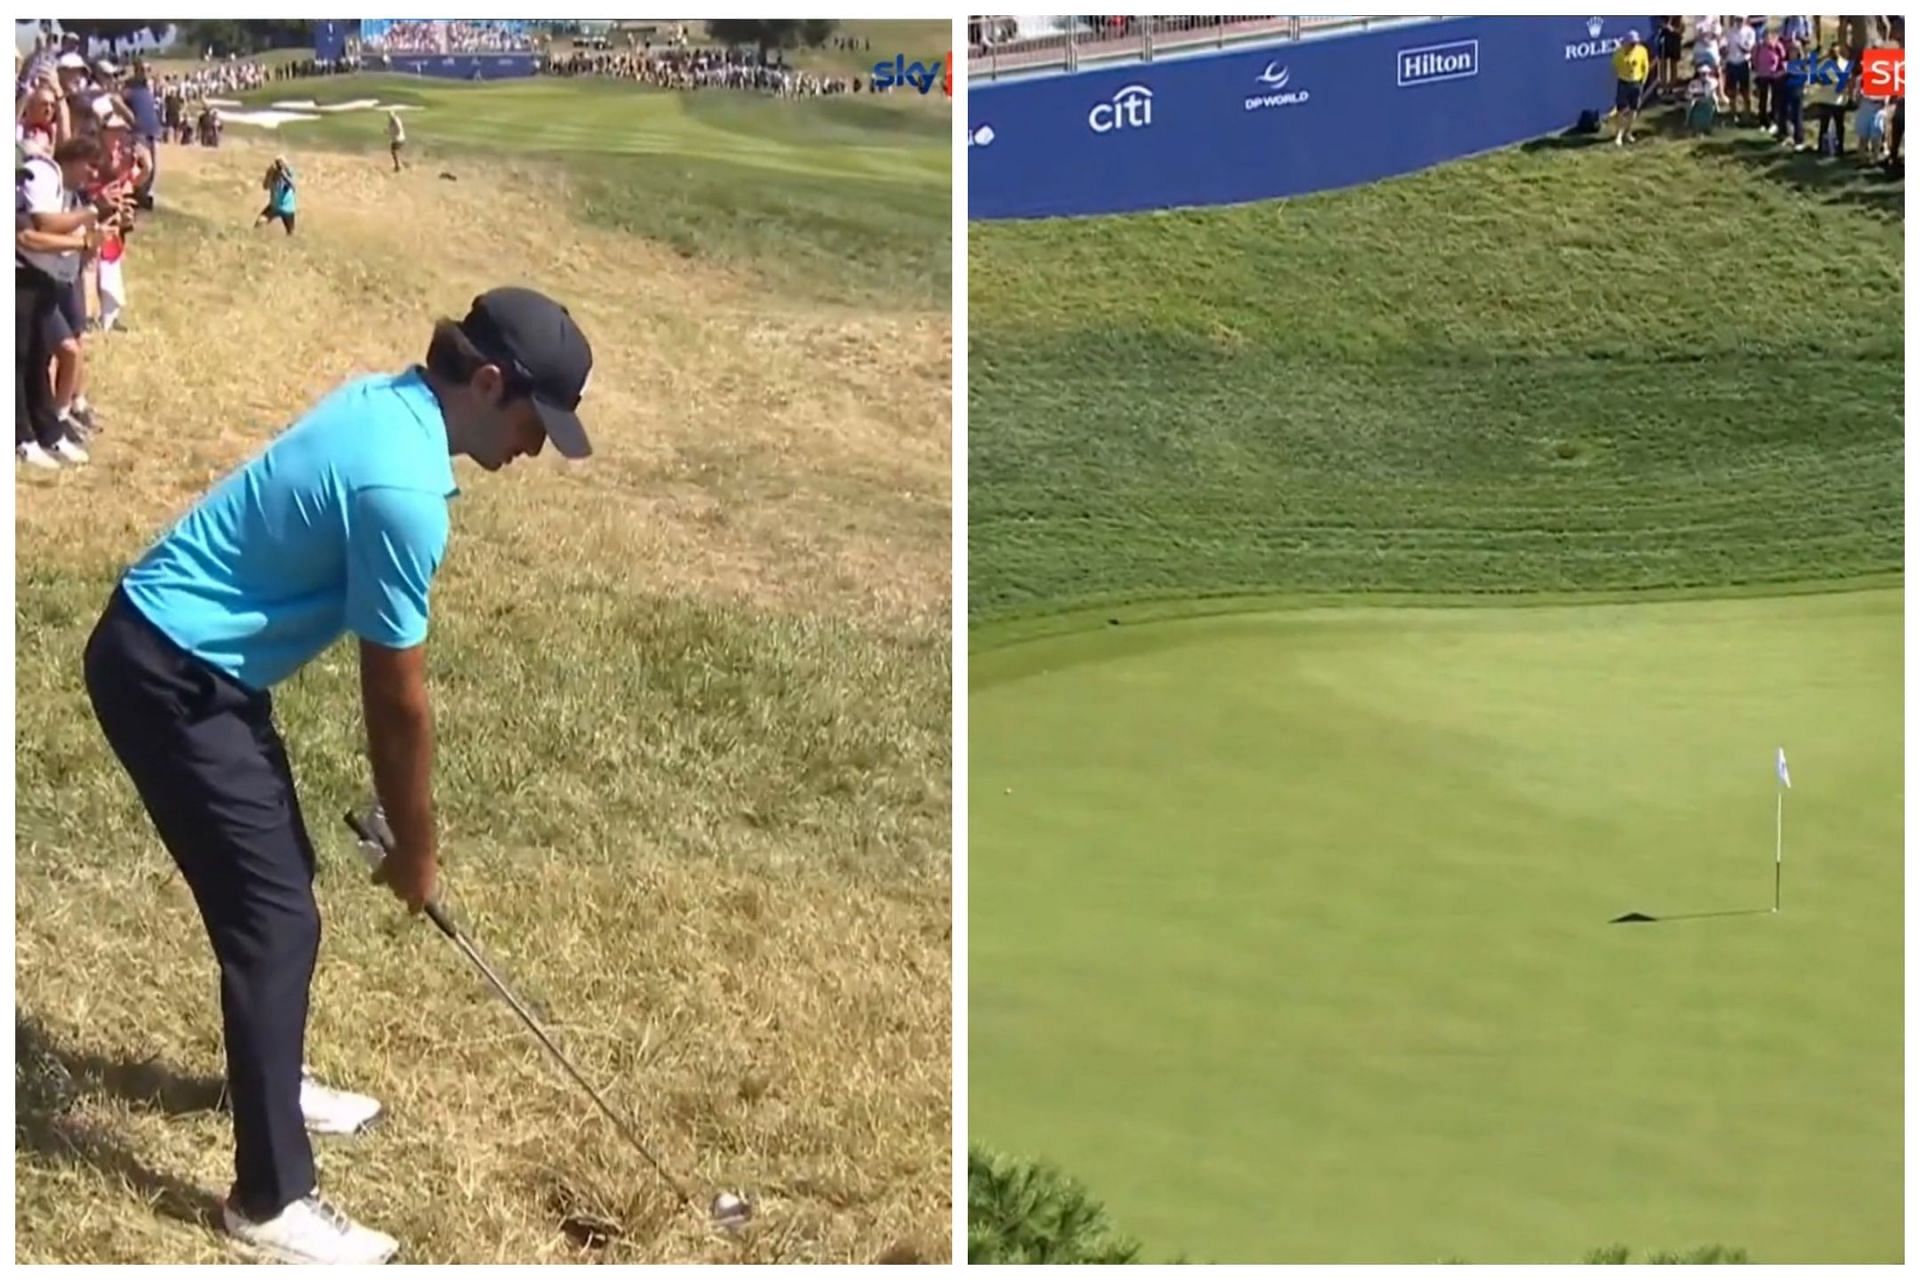 Carlos Sainz plays an incredible approach shot from the rough at the Ryder Cup All-Star match